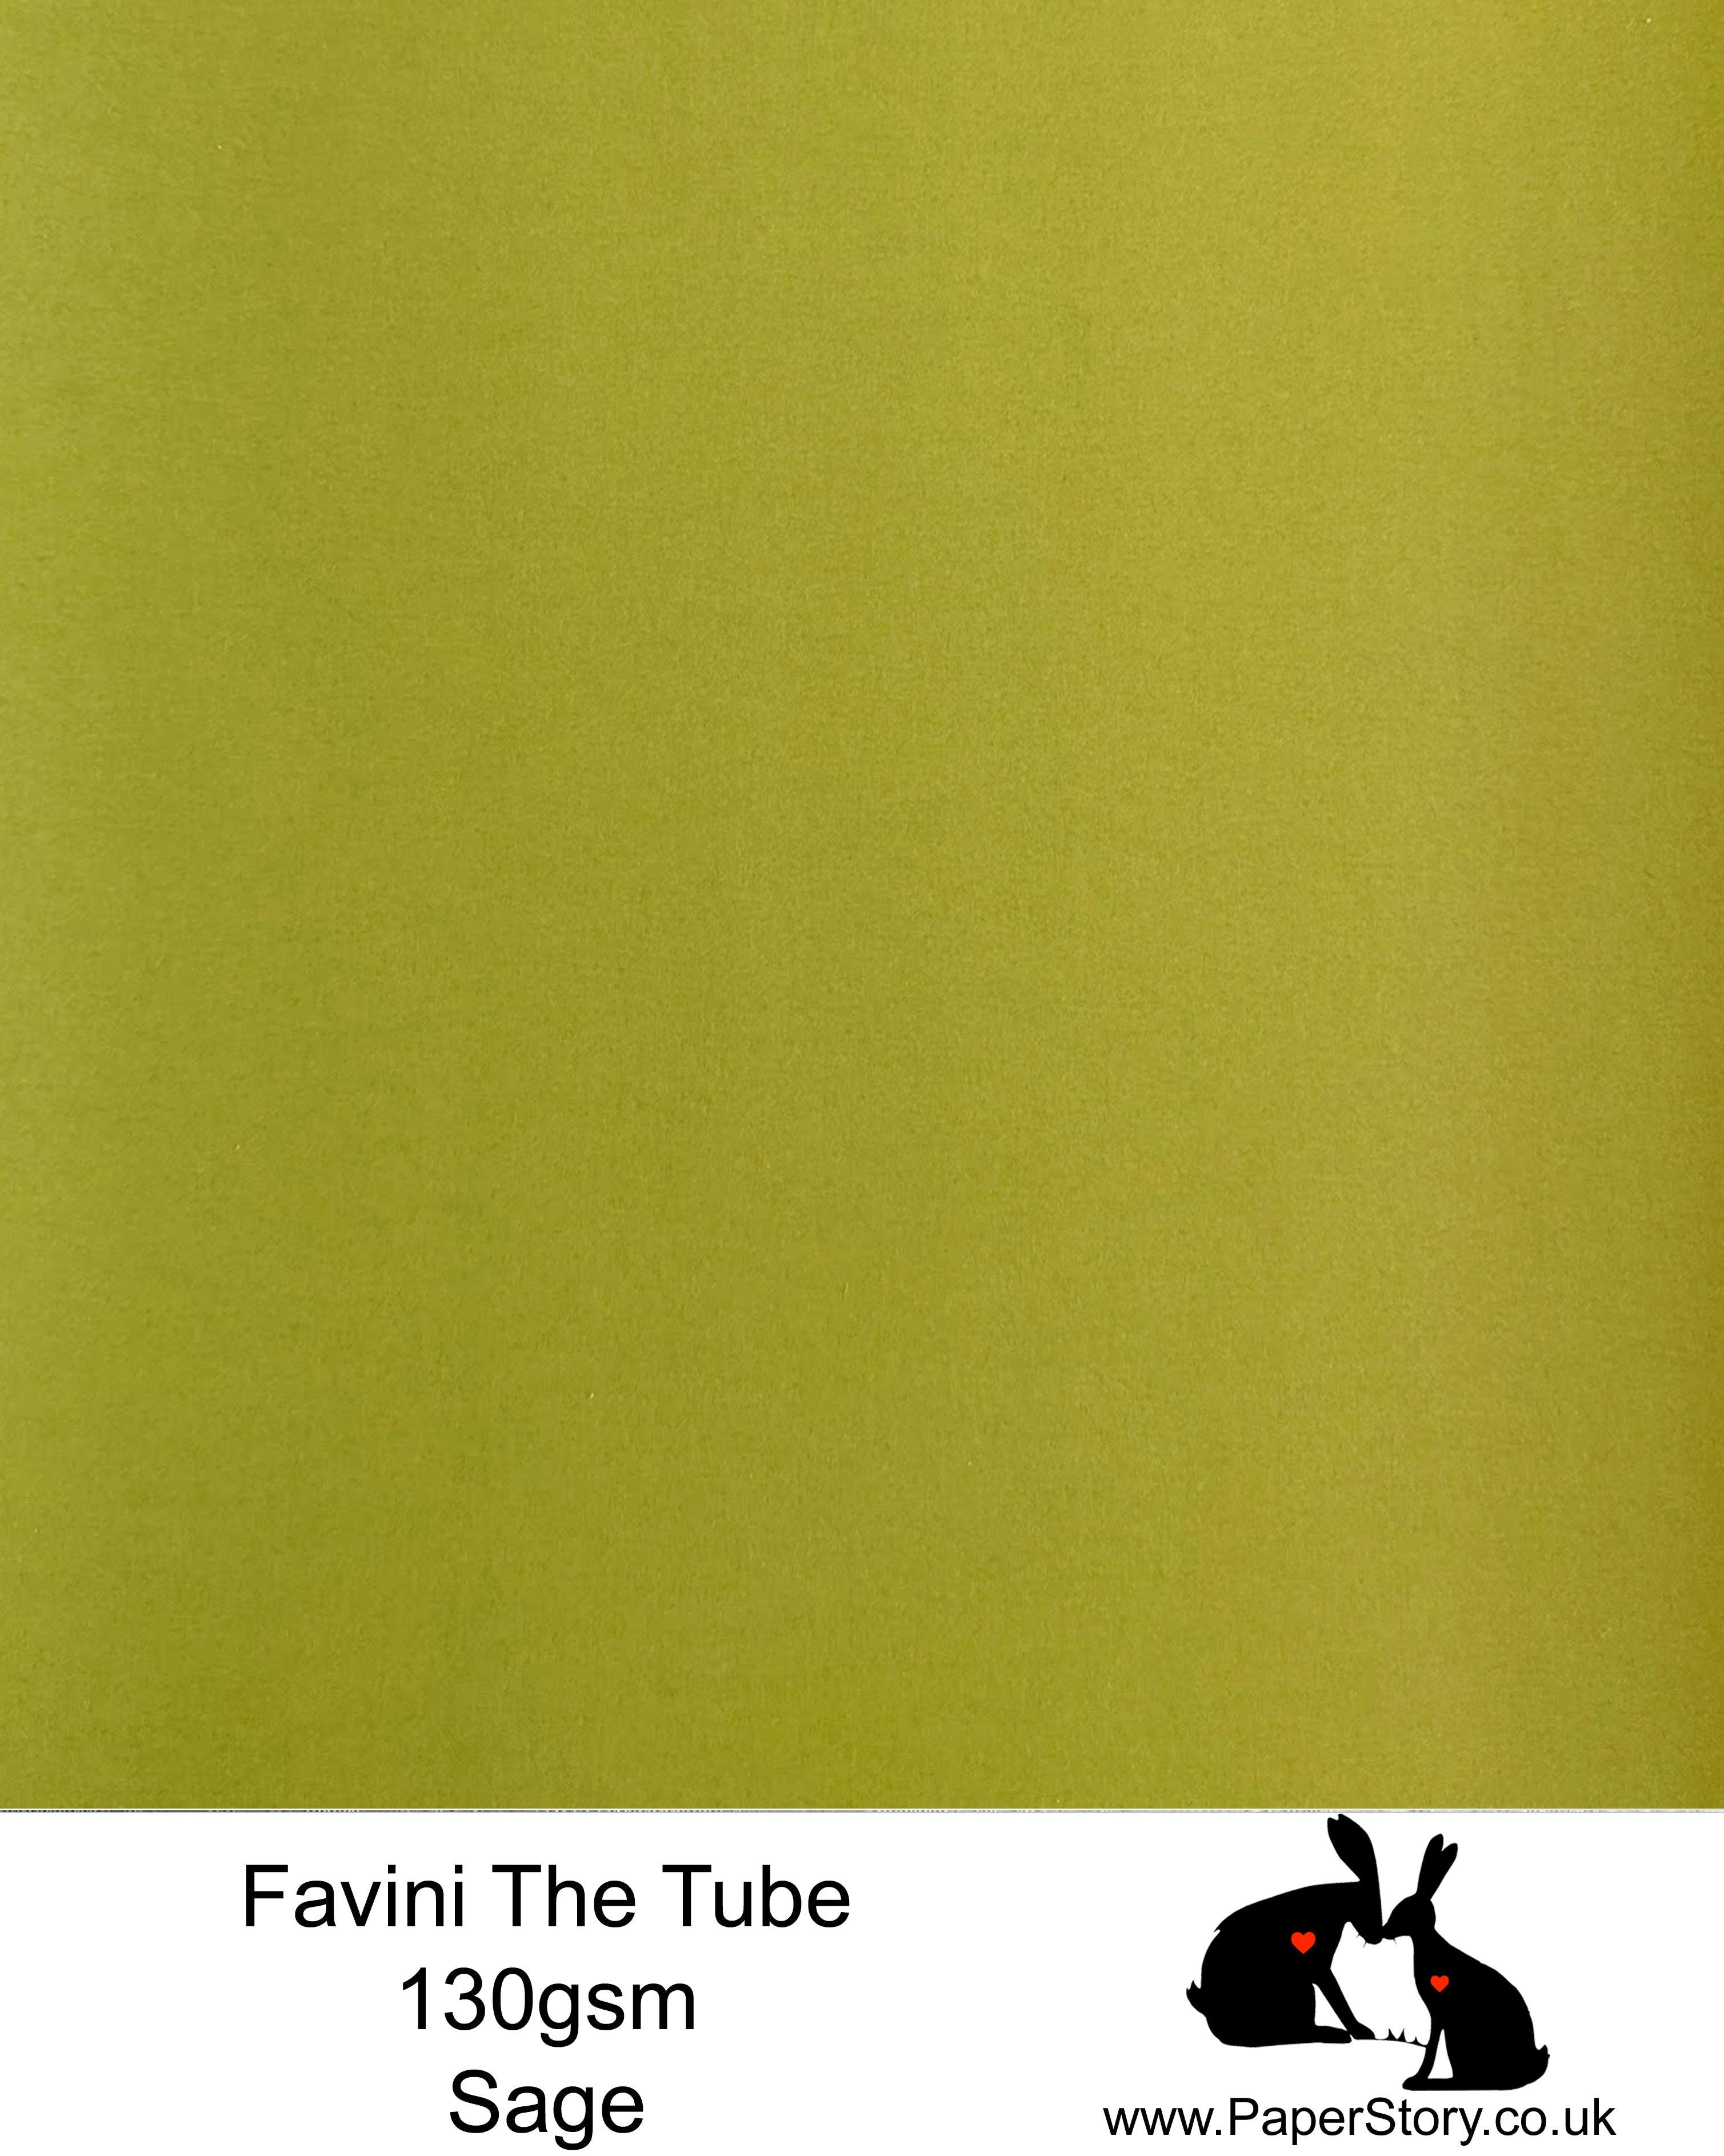 The Tube Favini paper 130 gsm is an innovative matte paper and our favourite  PaperCutting paper at PaperStory. This paper can also be used for foil and screen blocking. The subtle soft touch of this paper provides elegance and beauty . Made in Italy FSC approved, archival and acid free.